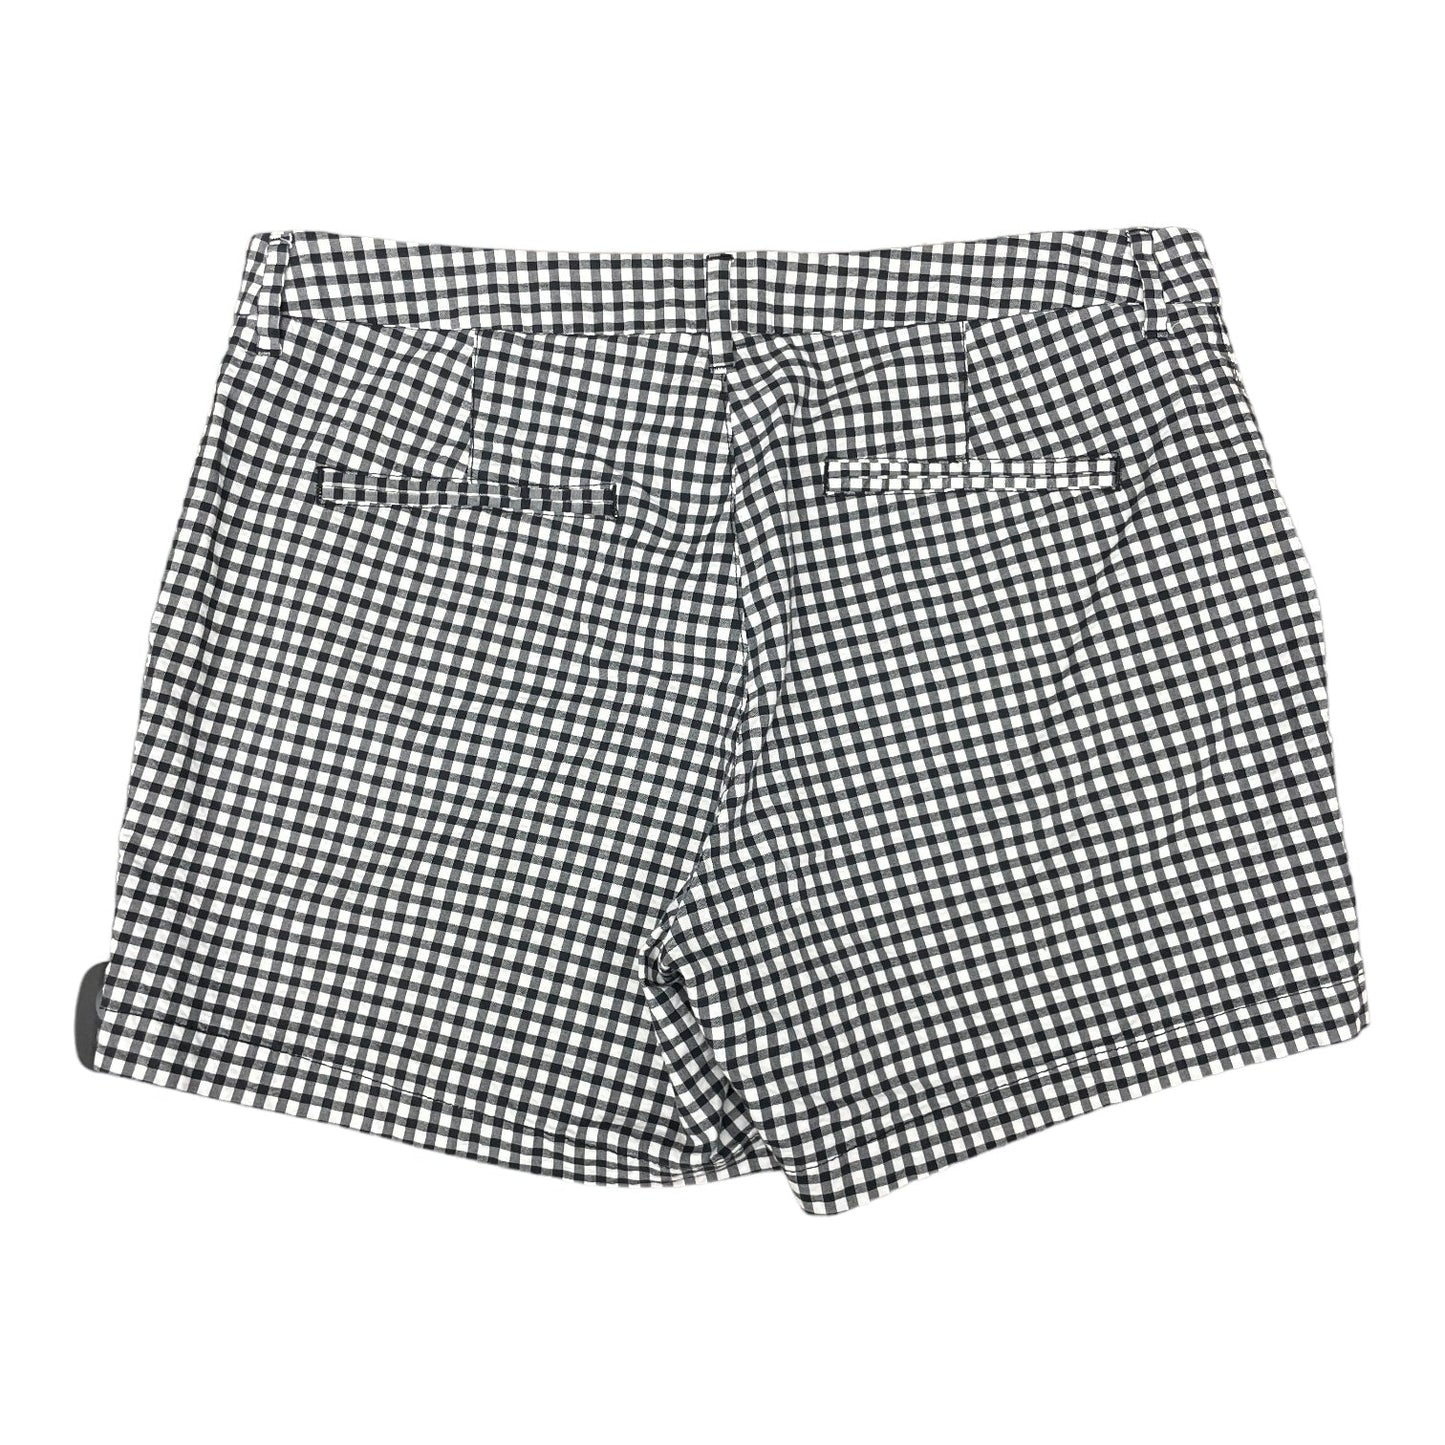 Checked Shorts Old Navy, Size 12